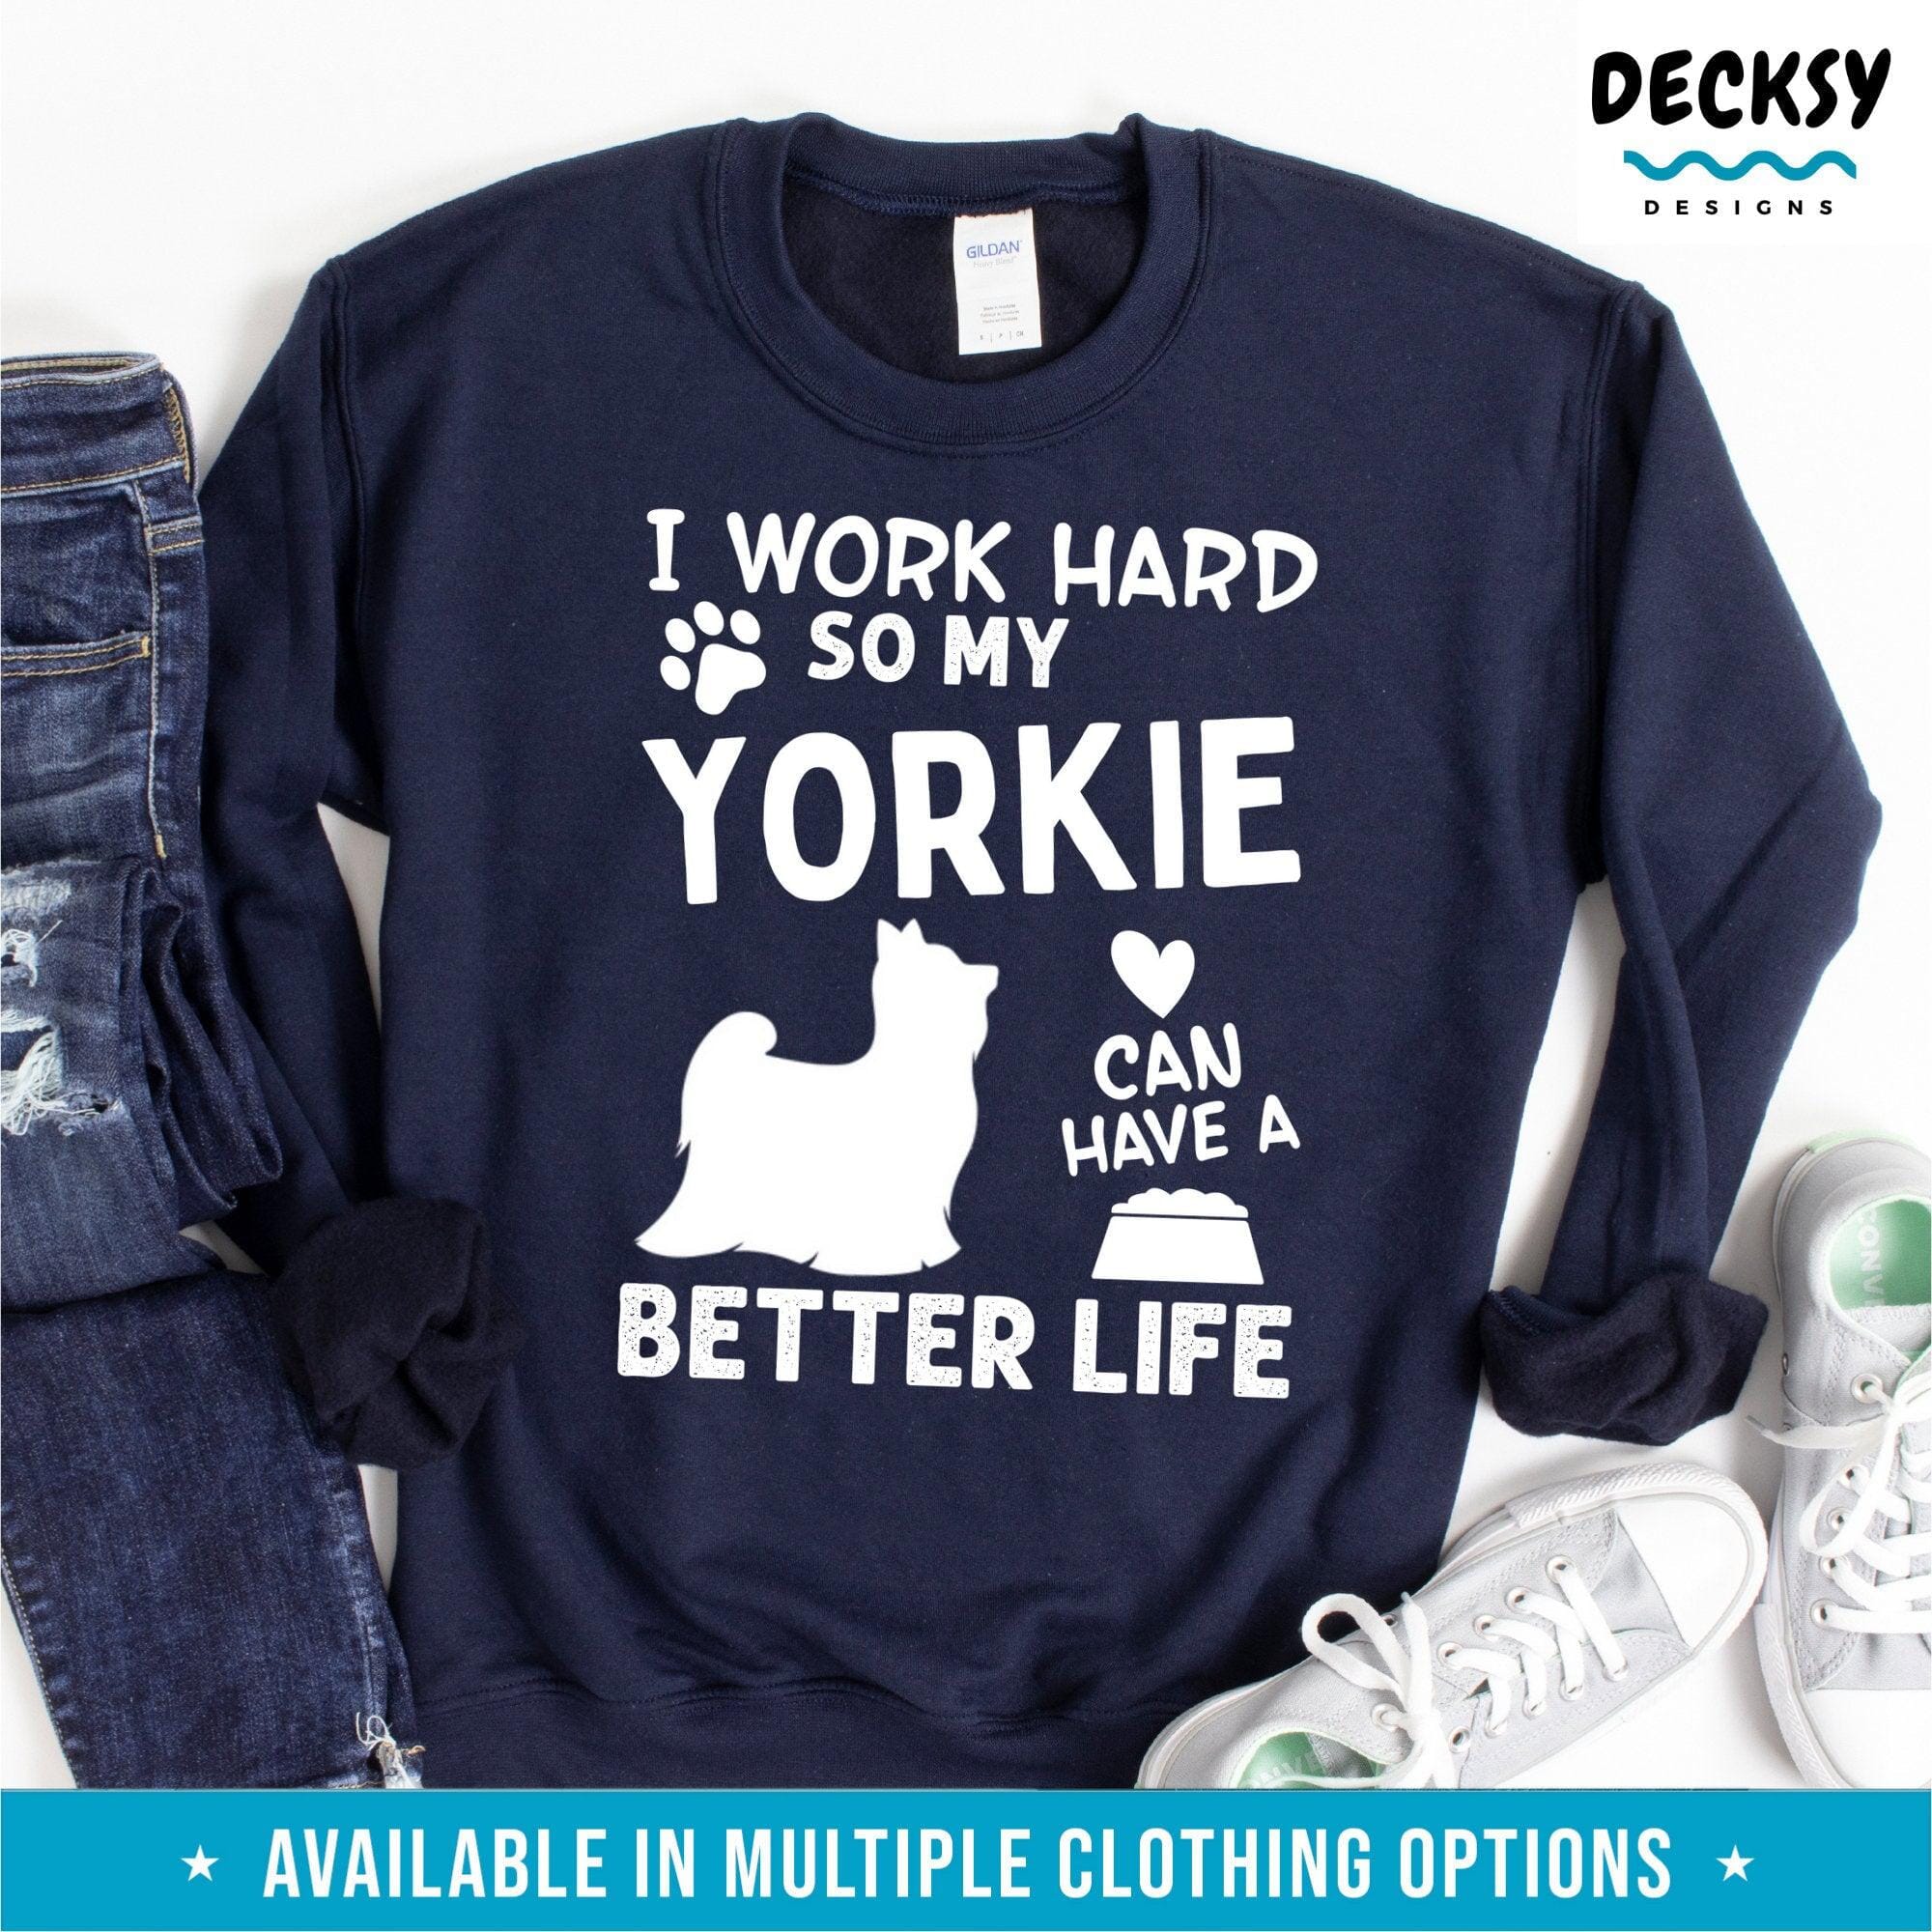 Yorkie Dog Lover Shirt, Yorkshire Terrier Gift-Clothing:Gender-Neutral Adult Clothing:Tops & Tees:T-shirts:Graphic Tees-DecksyDesigns